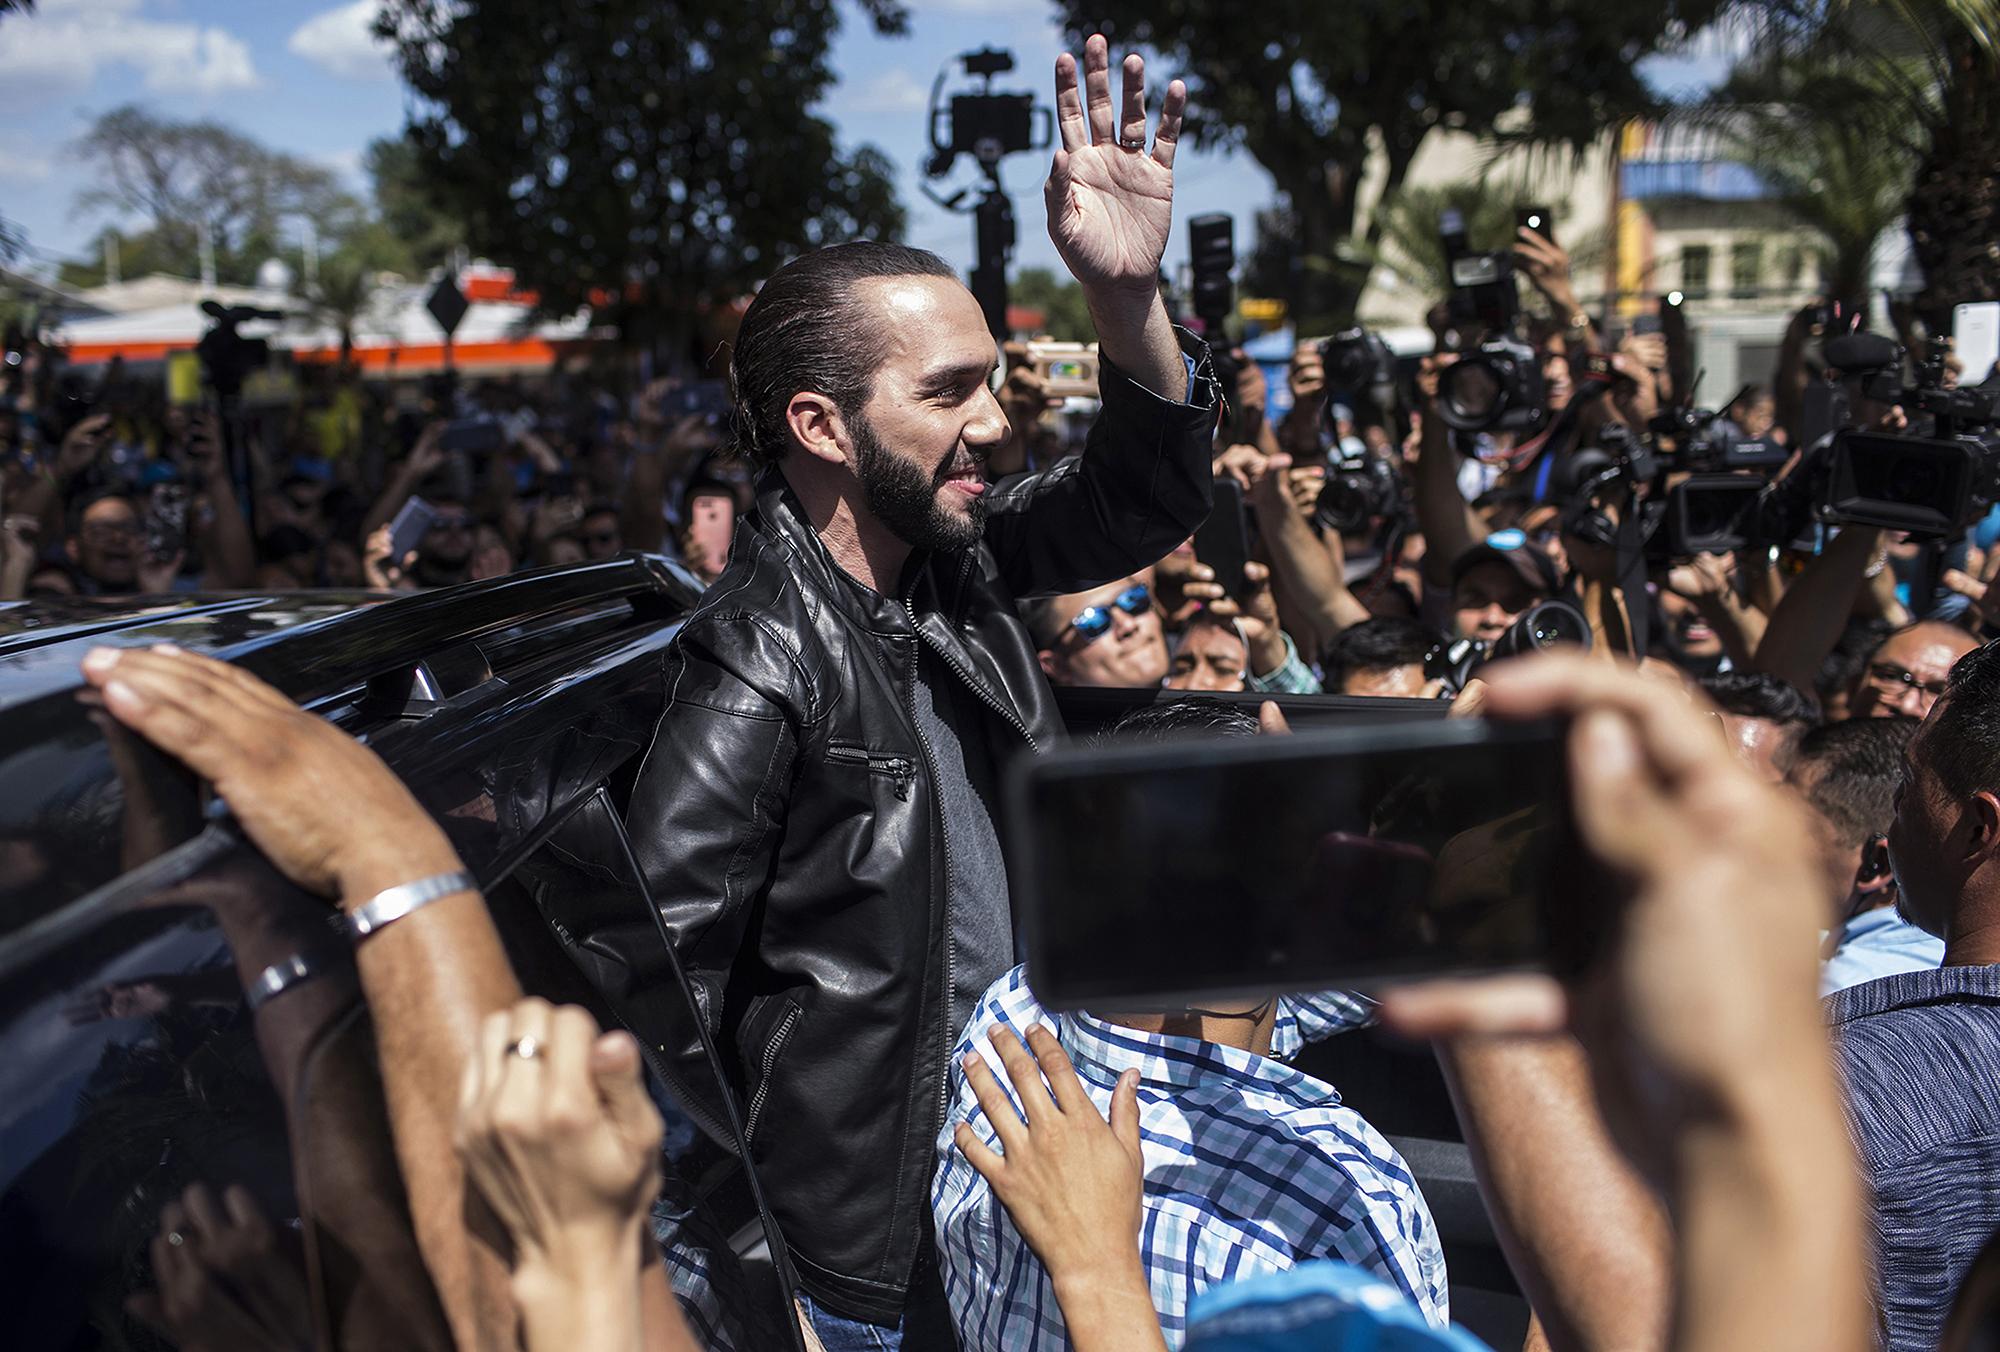 Then-presidential candidate Nayib Bukele greets supporters in San Salvador on election day in February 3, 2019. The popular candidate went on to sweep the elections without a runoff, garnering 53 percent of the vote outright. Photo: Víctor Peña/El Faro